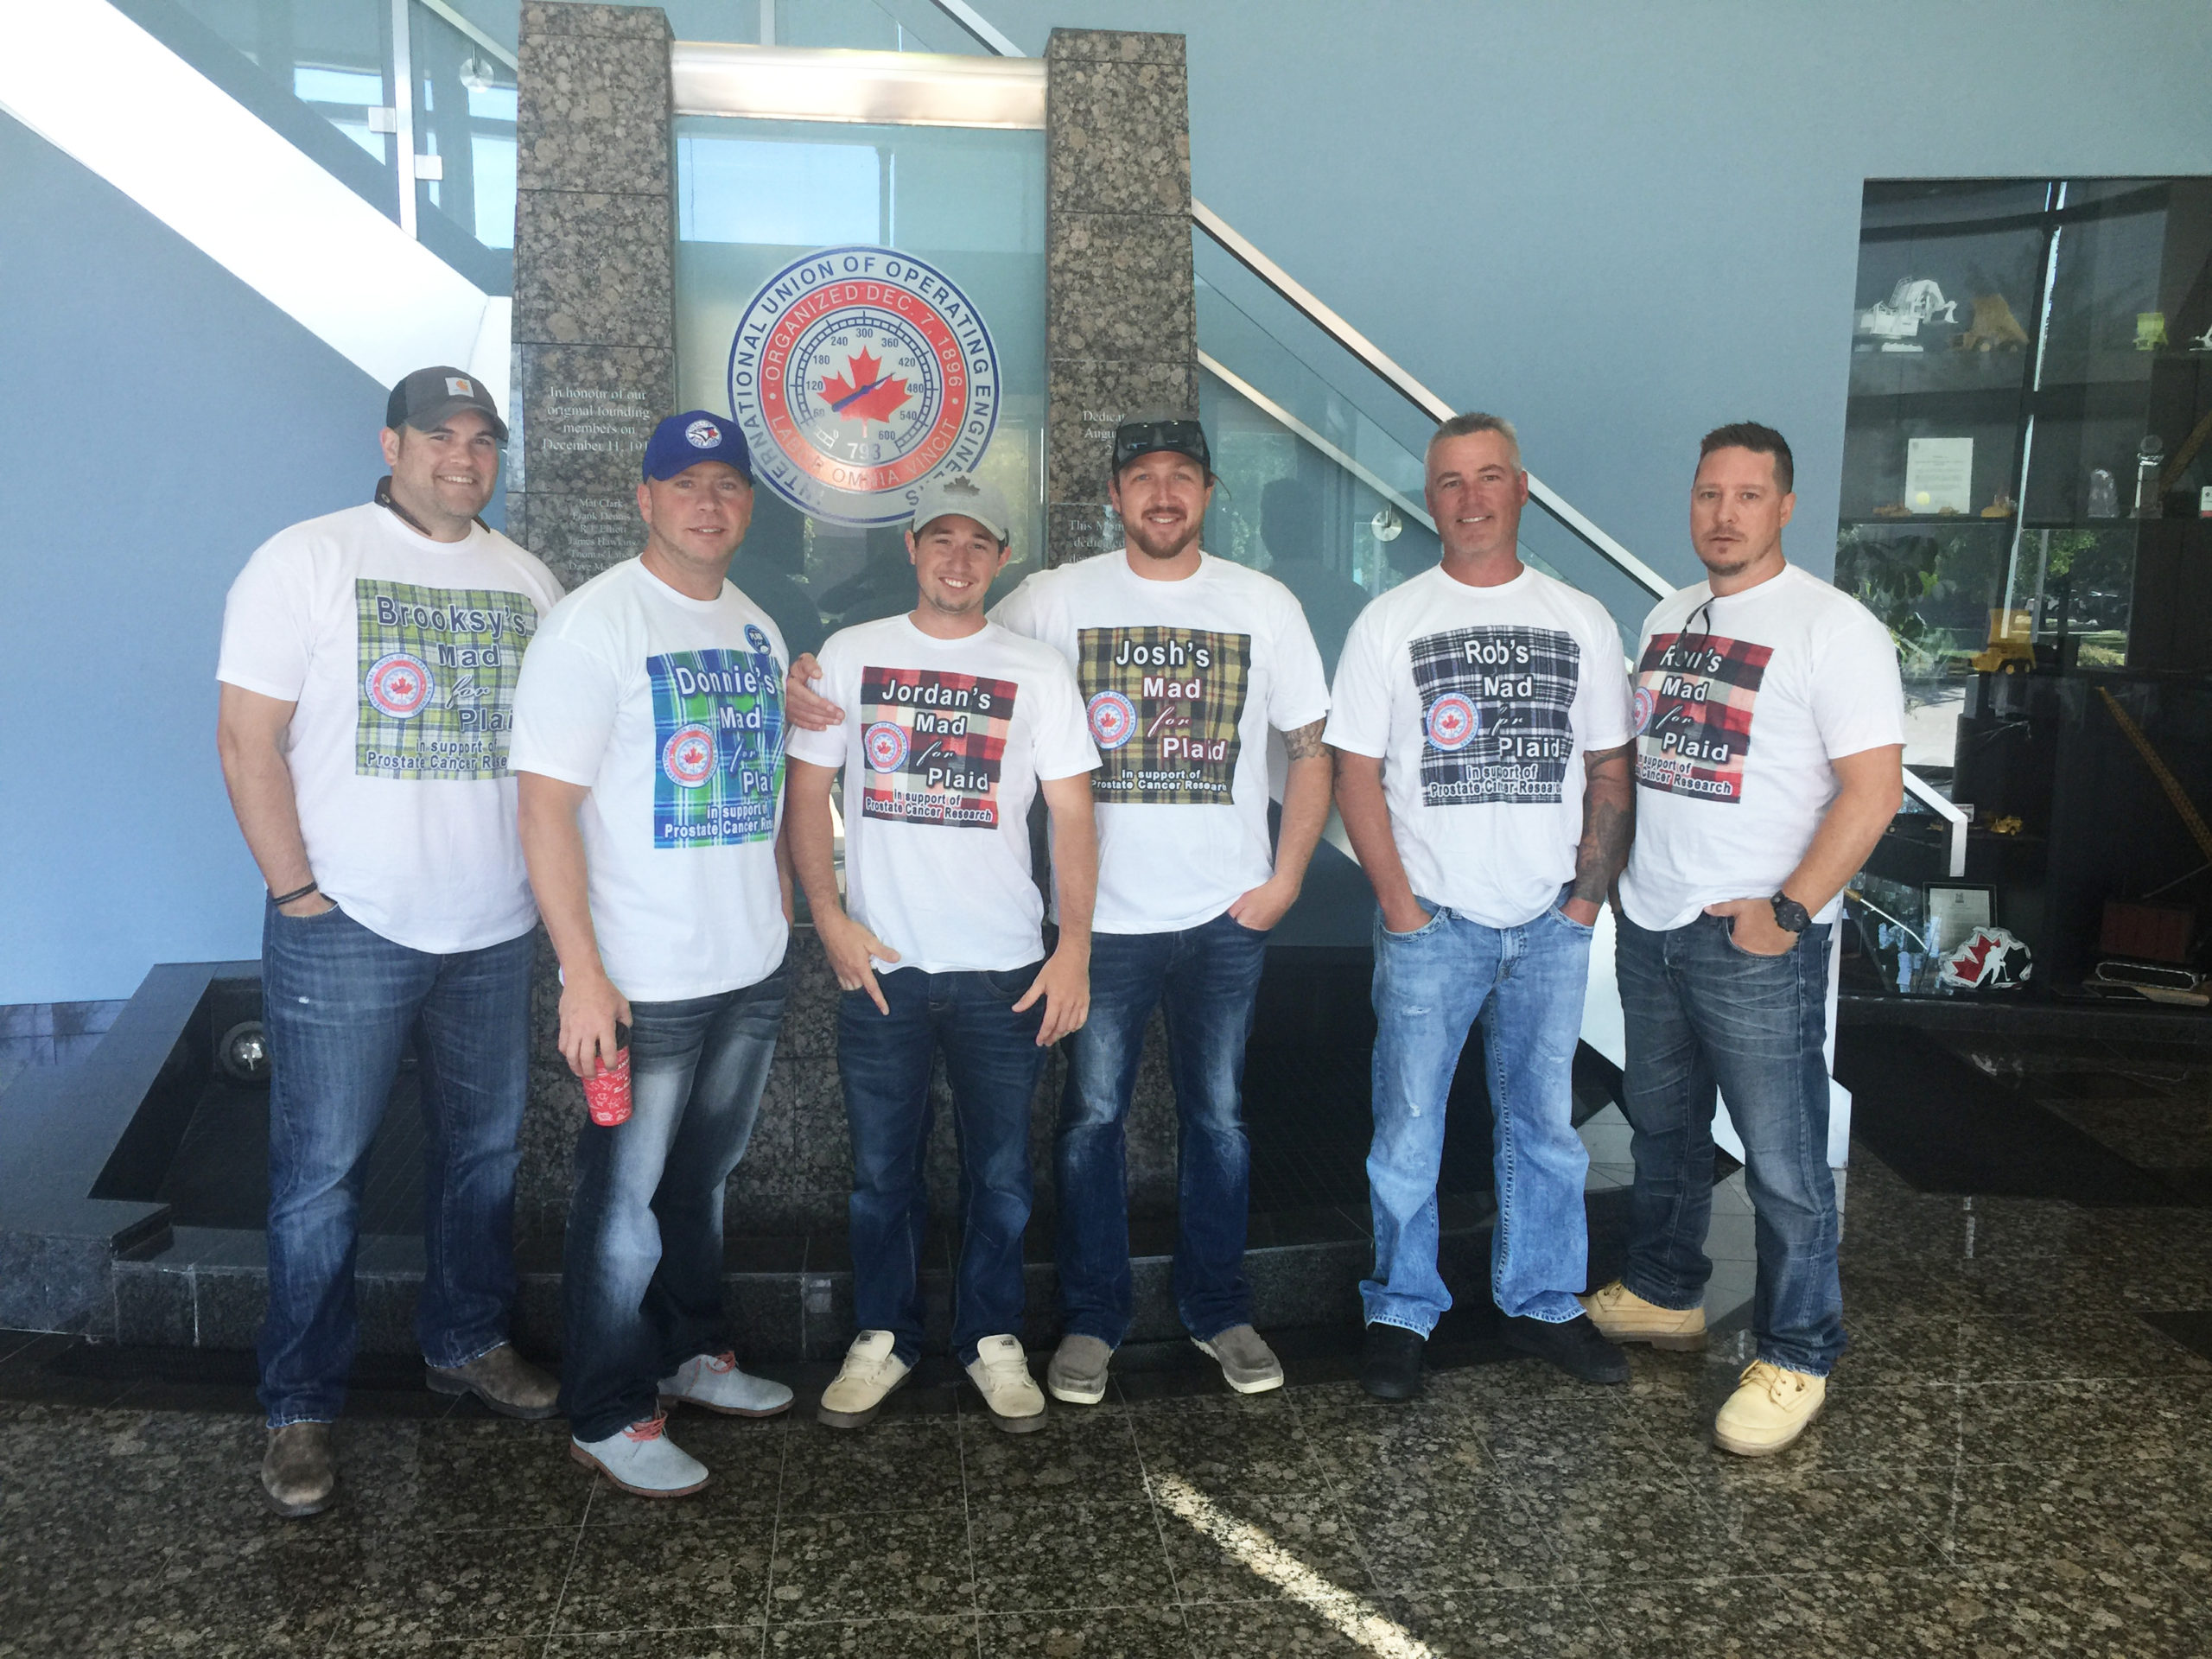 Local 793 and OETIO staff took part in the Plaid for Dad campaign, helping to raise funds for prostate cancer research.